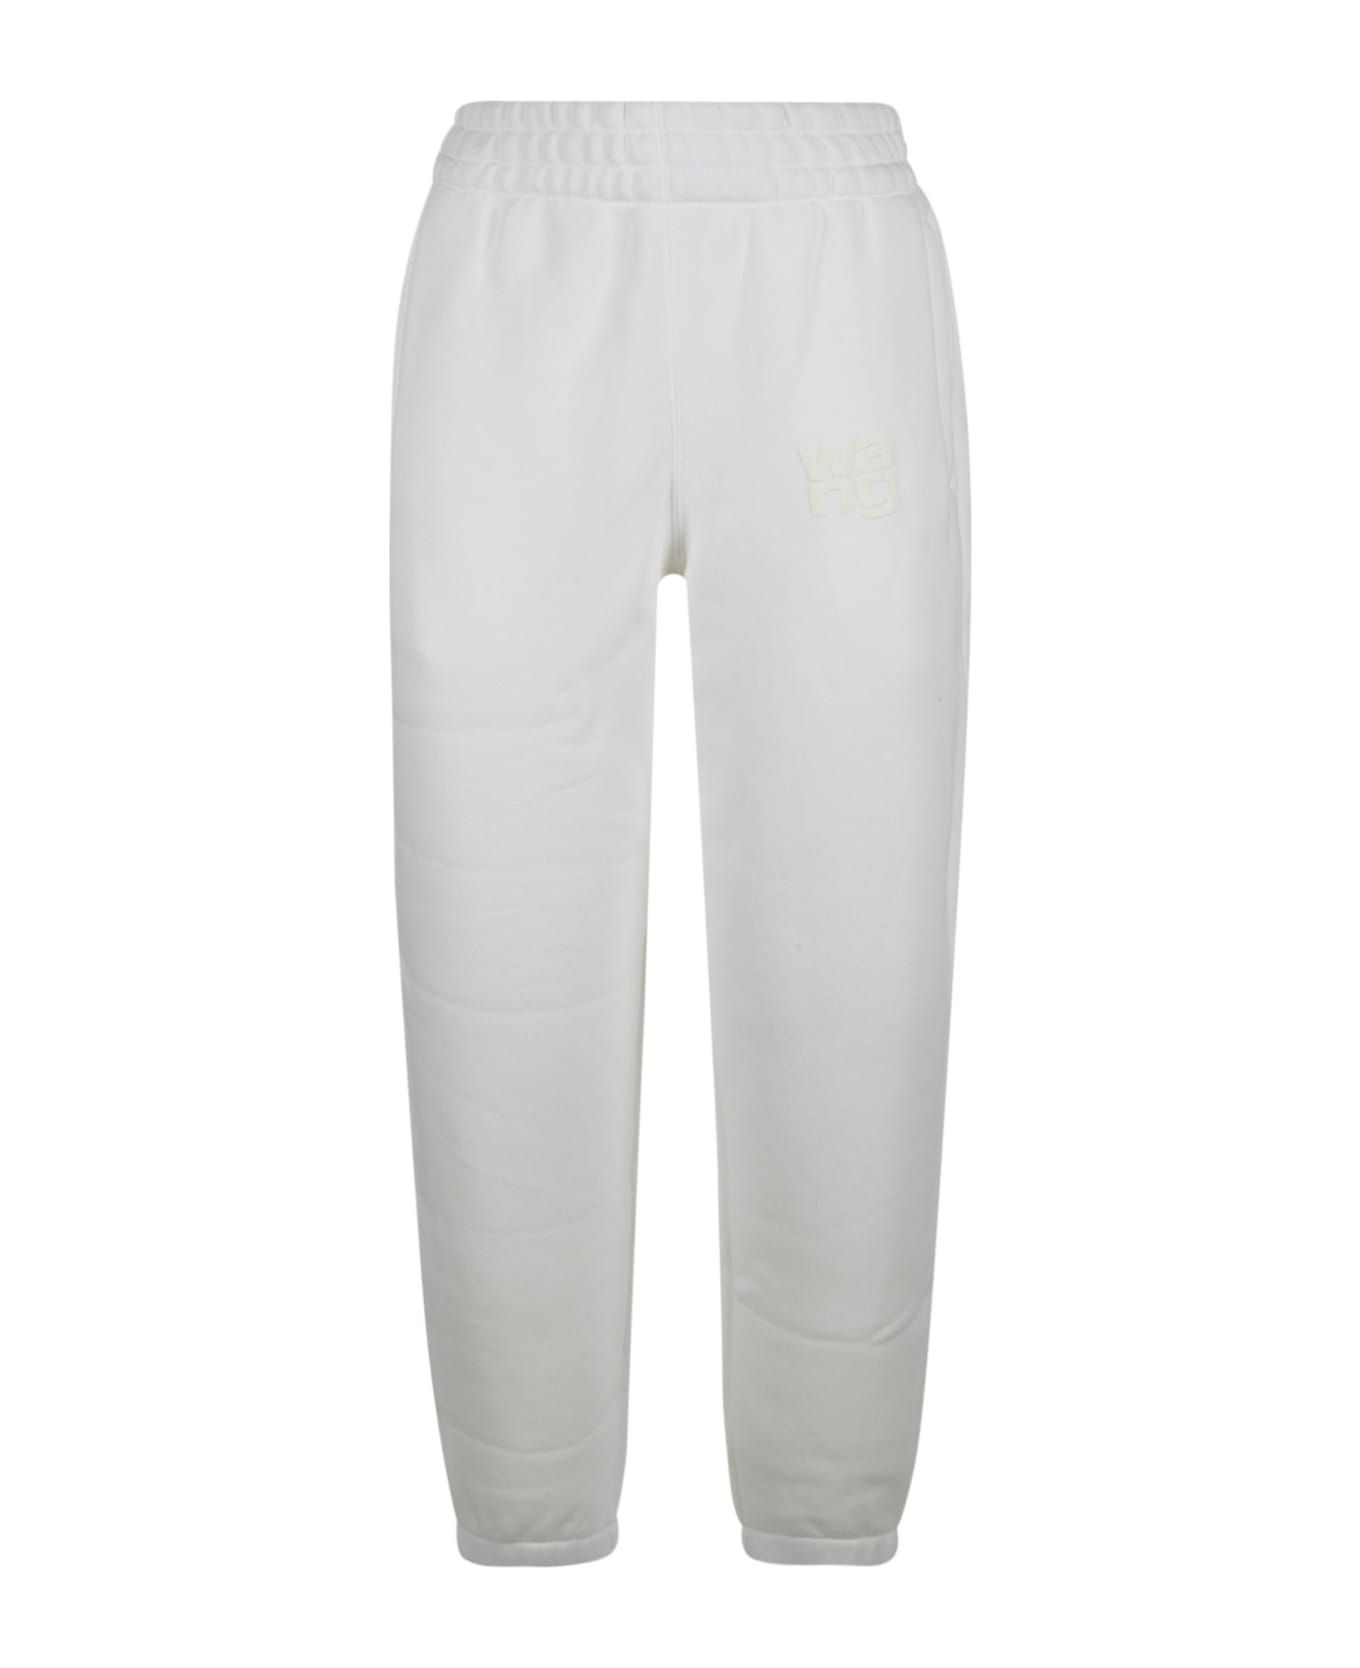 Alexander Wang Essential Terry Classic Track Pants - White